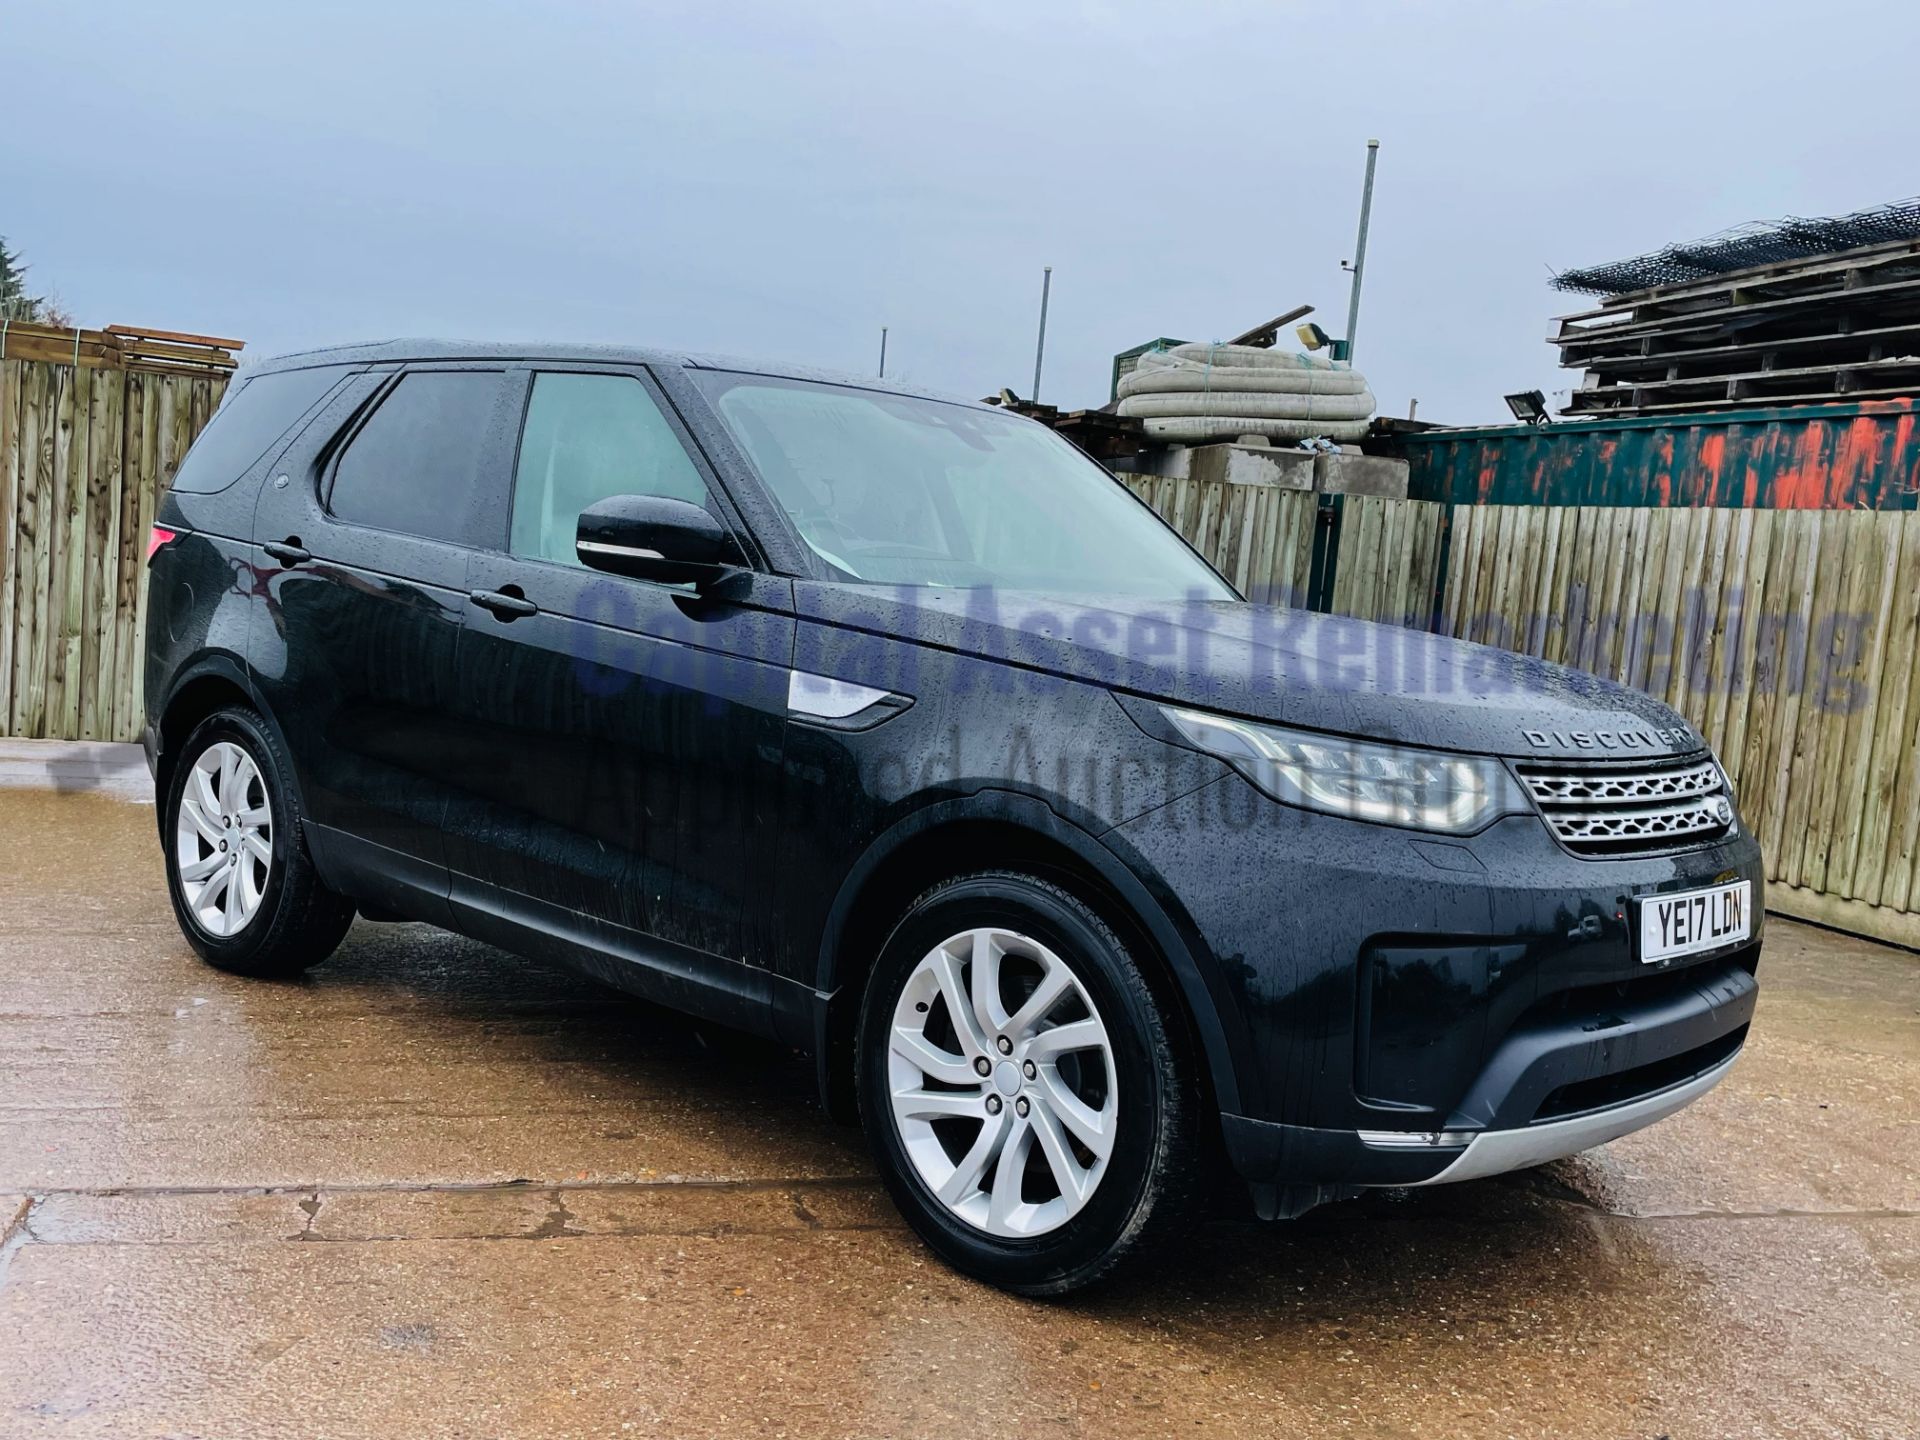 LAND ROVER DISCOVERY 5 *HSE EDITION* 7 SEATER SUV (2017 EURO 6) 8 SPEED AUTO - PAN ROOF *HUGE SPEC*